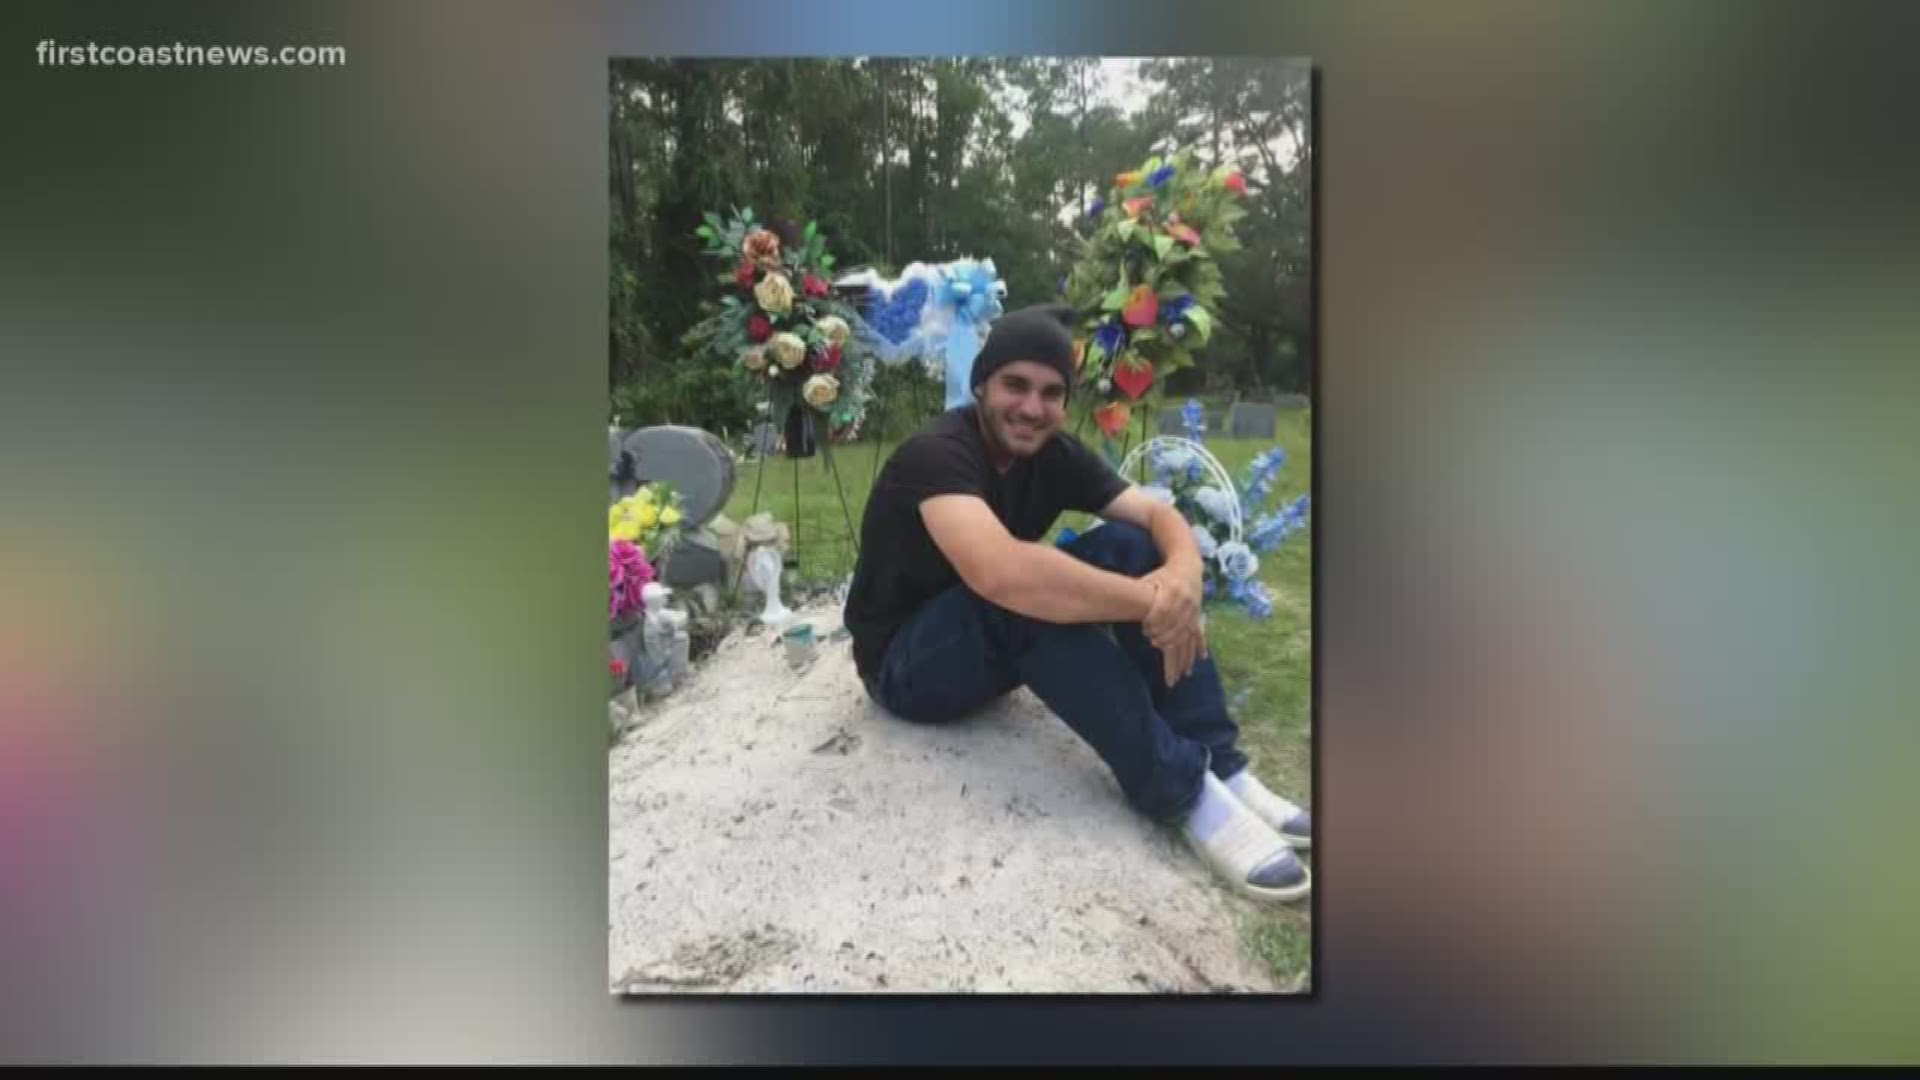 Family members told First Coast News that 21-year-old Alex Karagiannopoulos was shot inside his home on Tango Lane Saturday evening and later succumbed to his injuries.